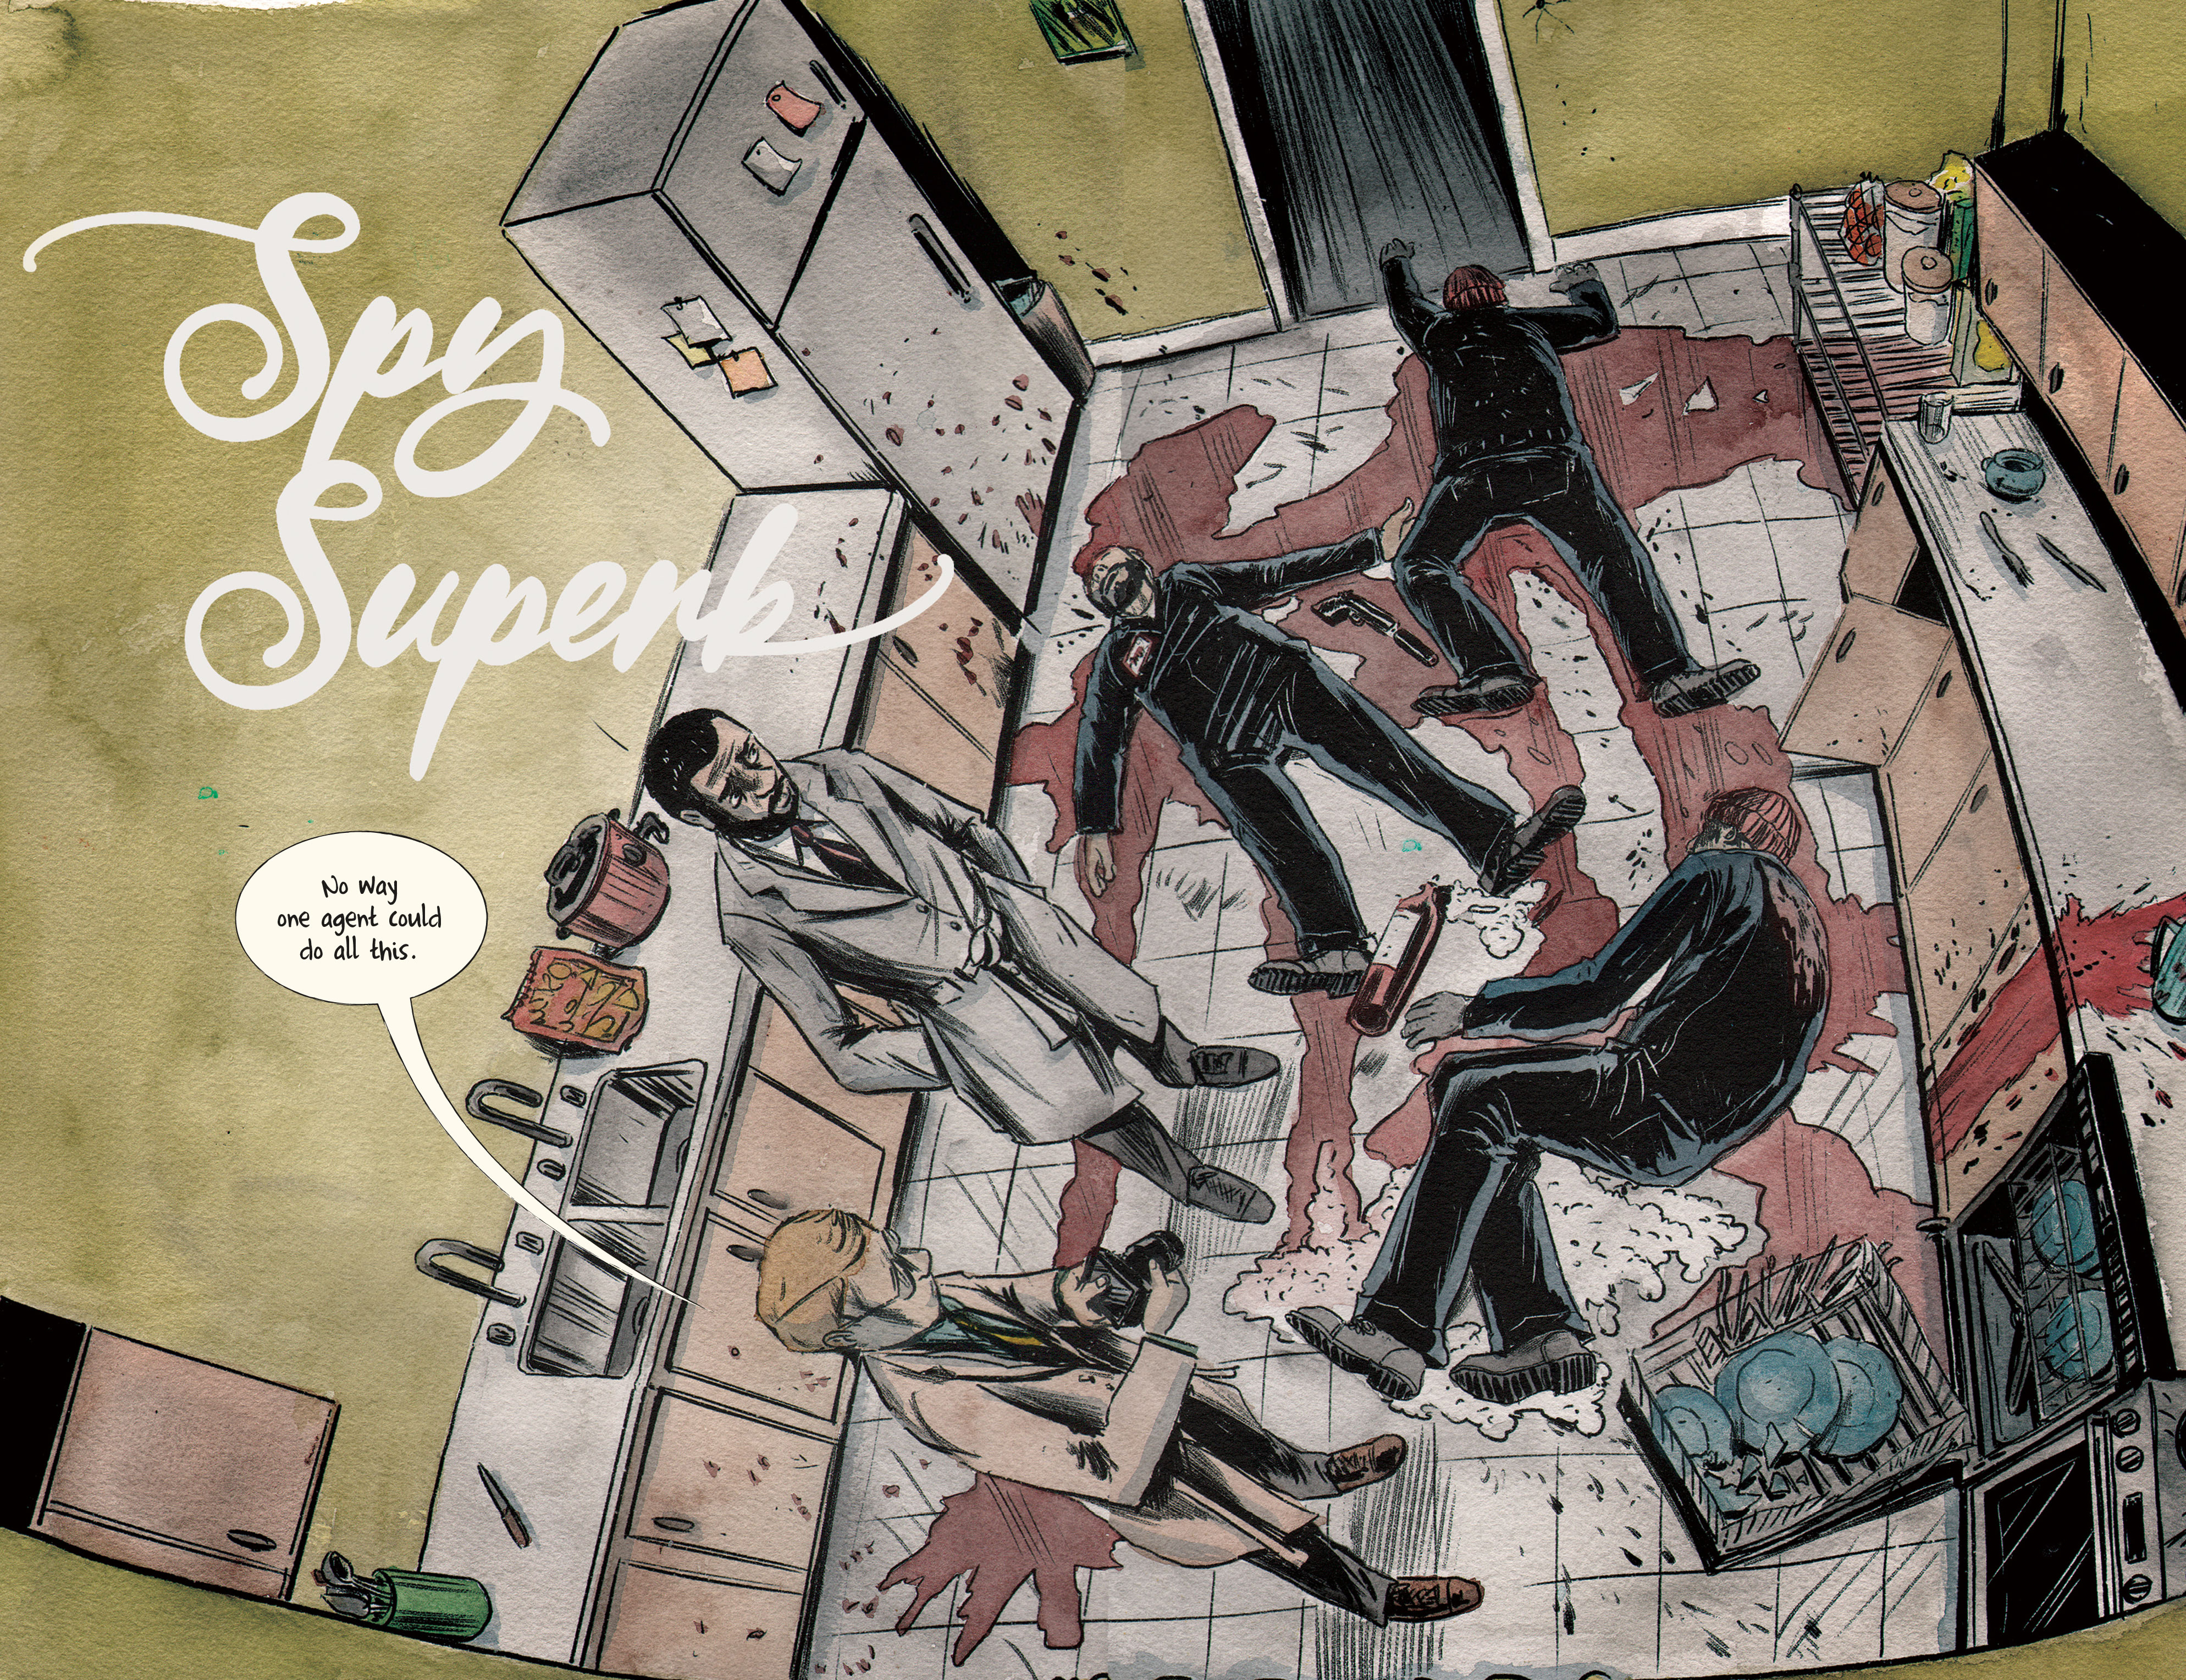 Read online Spy Superb comic -  Issue #2 - 6